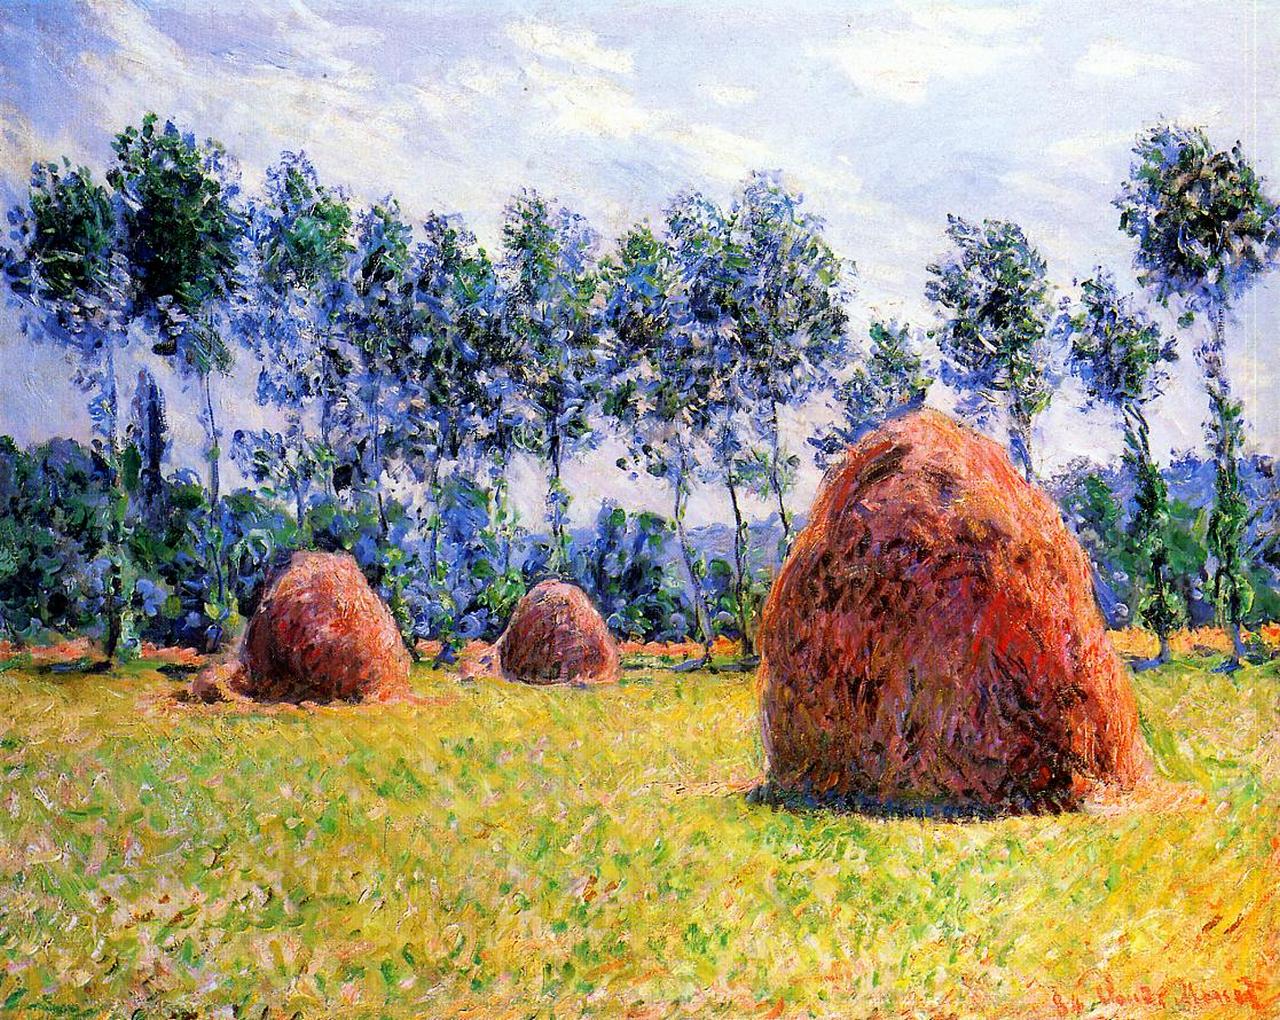 Haystacks at Giverny by Claude Monet - 1890 - 61 x 82 cm private collection